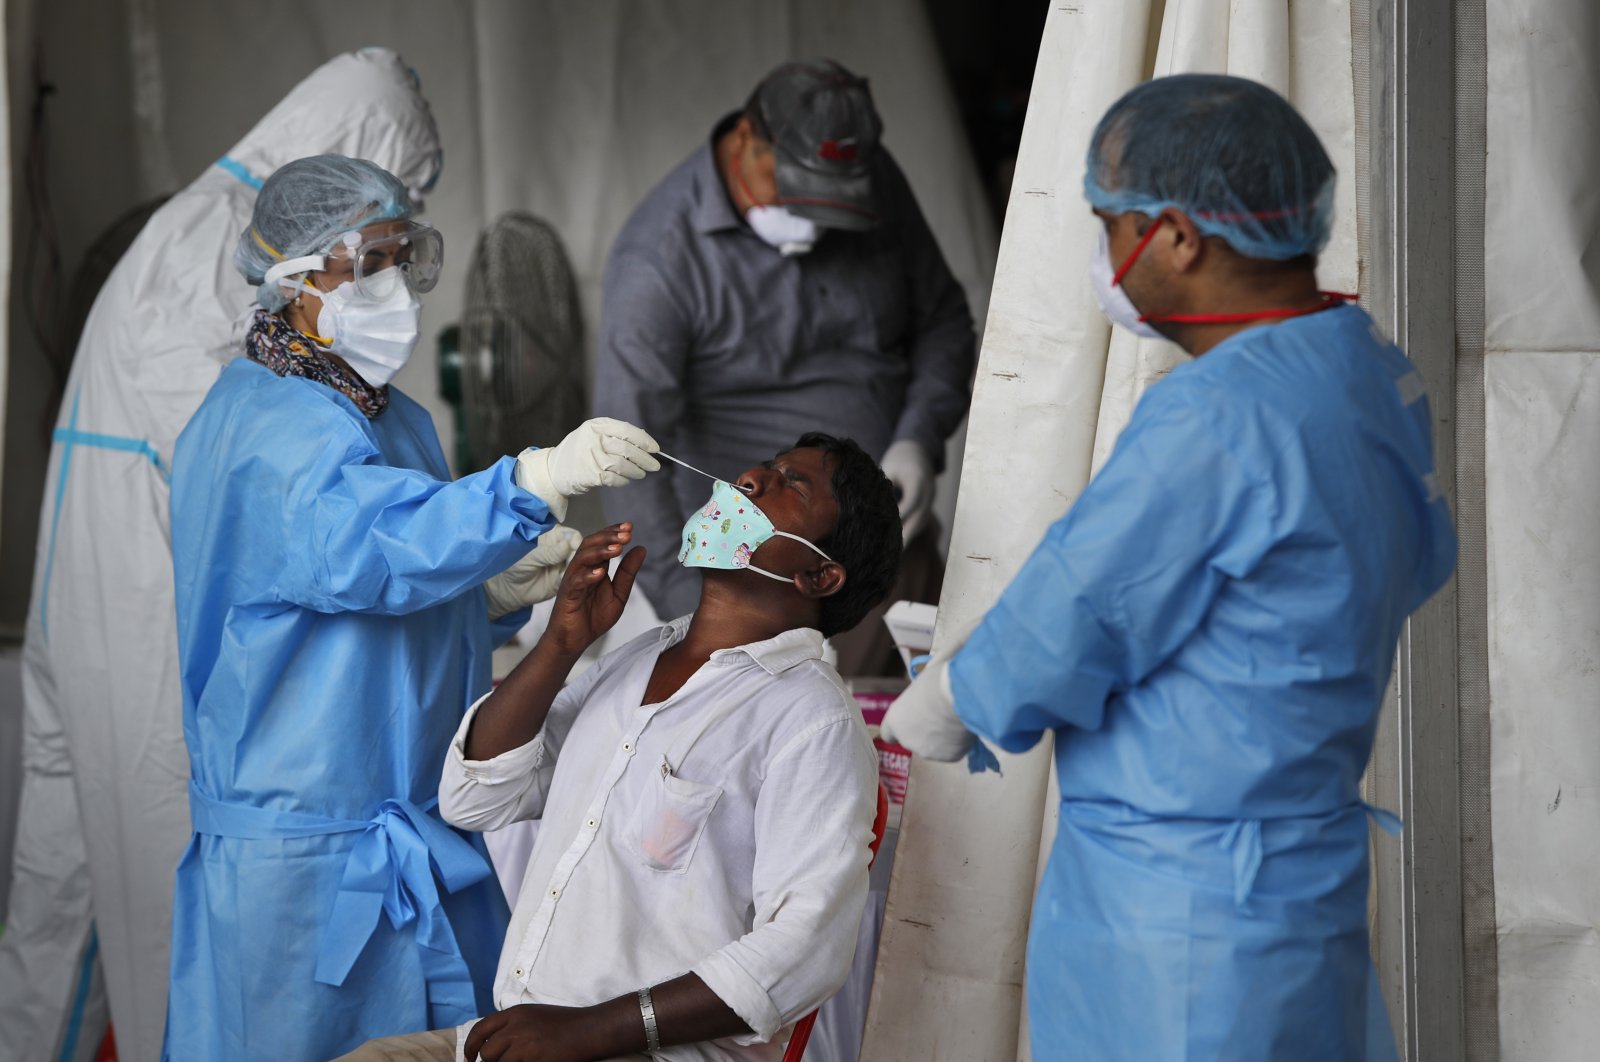 Health workers conduct COVID-19 antigen tests for migrant workers in New Delhi, India, Aug. 18, 2020. (AP Photo)